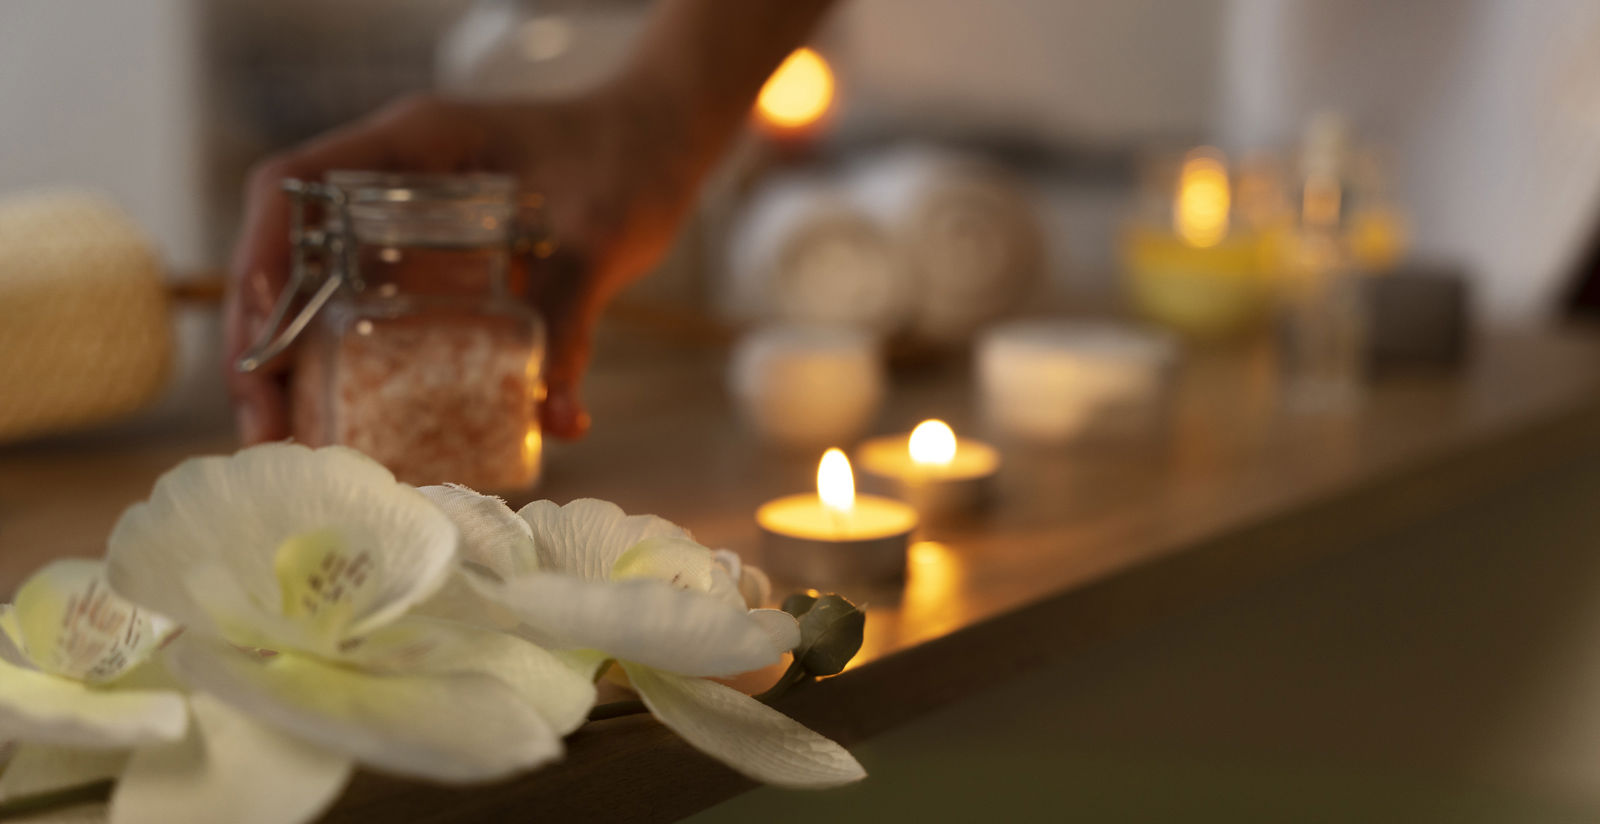 Infinito Resort - Massages & Beauty Treatments price list 22